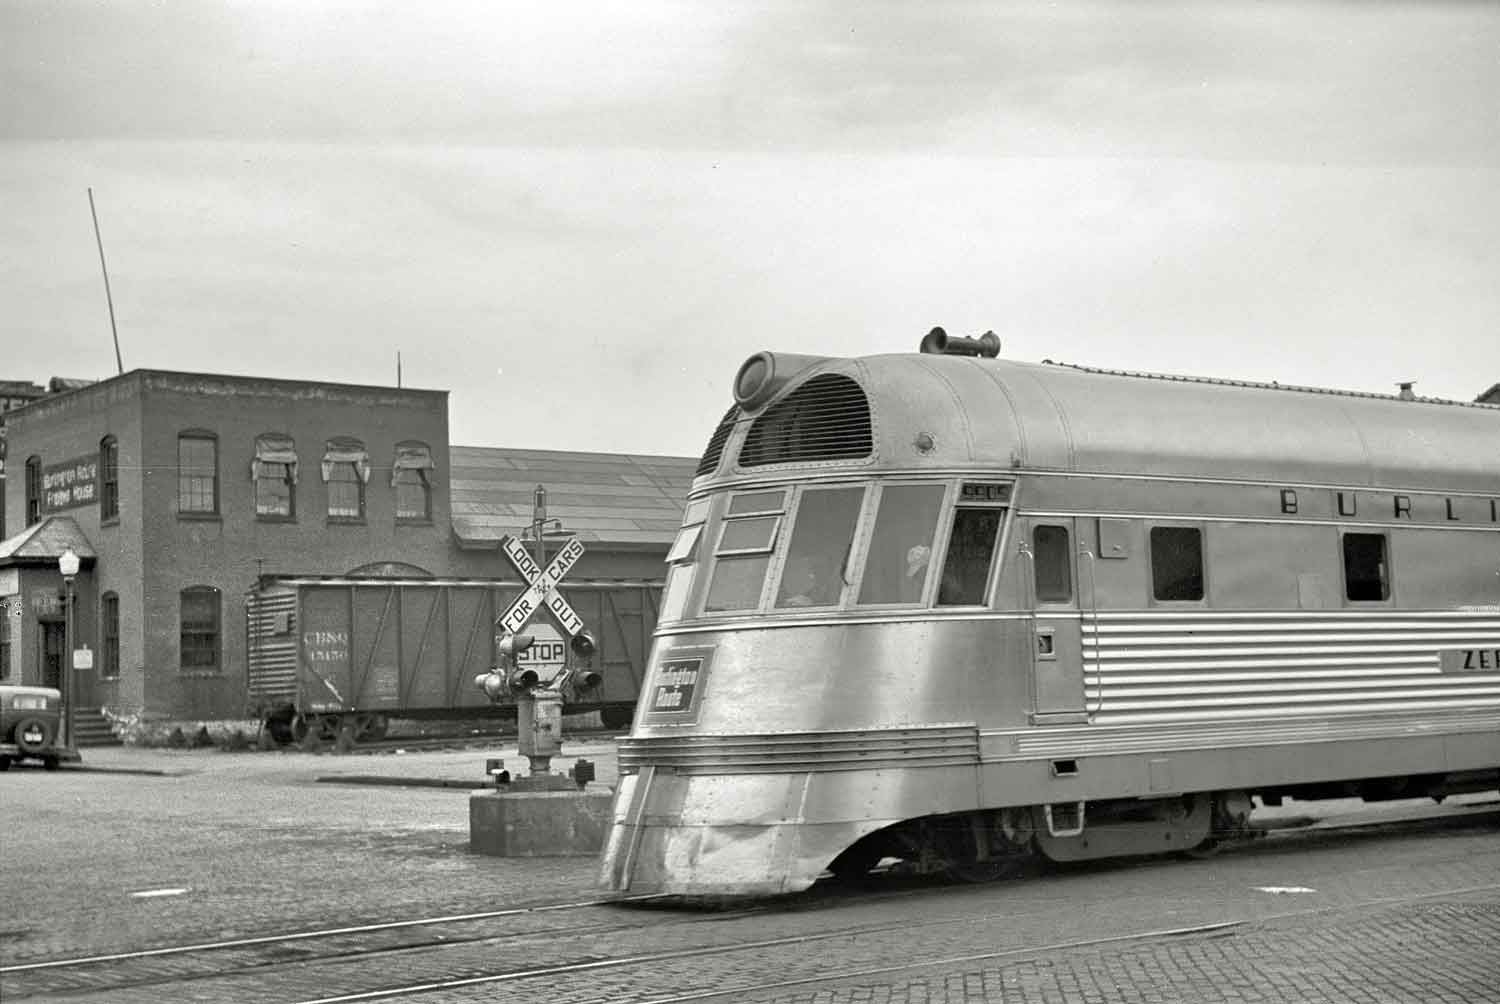 In this black-and-white photograph taken at La Crosse, Wisconsin, the Burlington’s streamlined Zephyr diesel express reaches a crossing, showing off its lightweight, stainless-steel construction. 